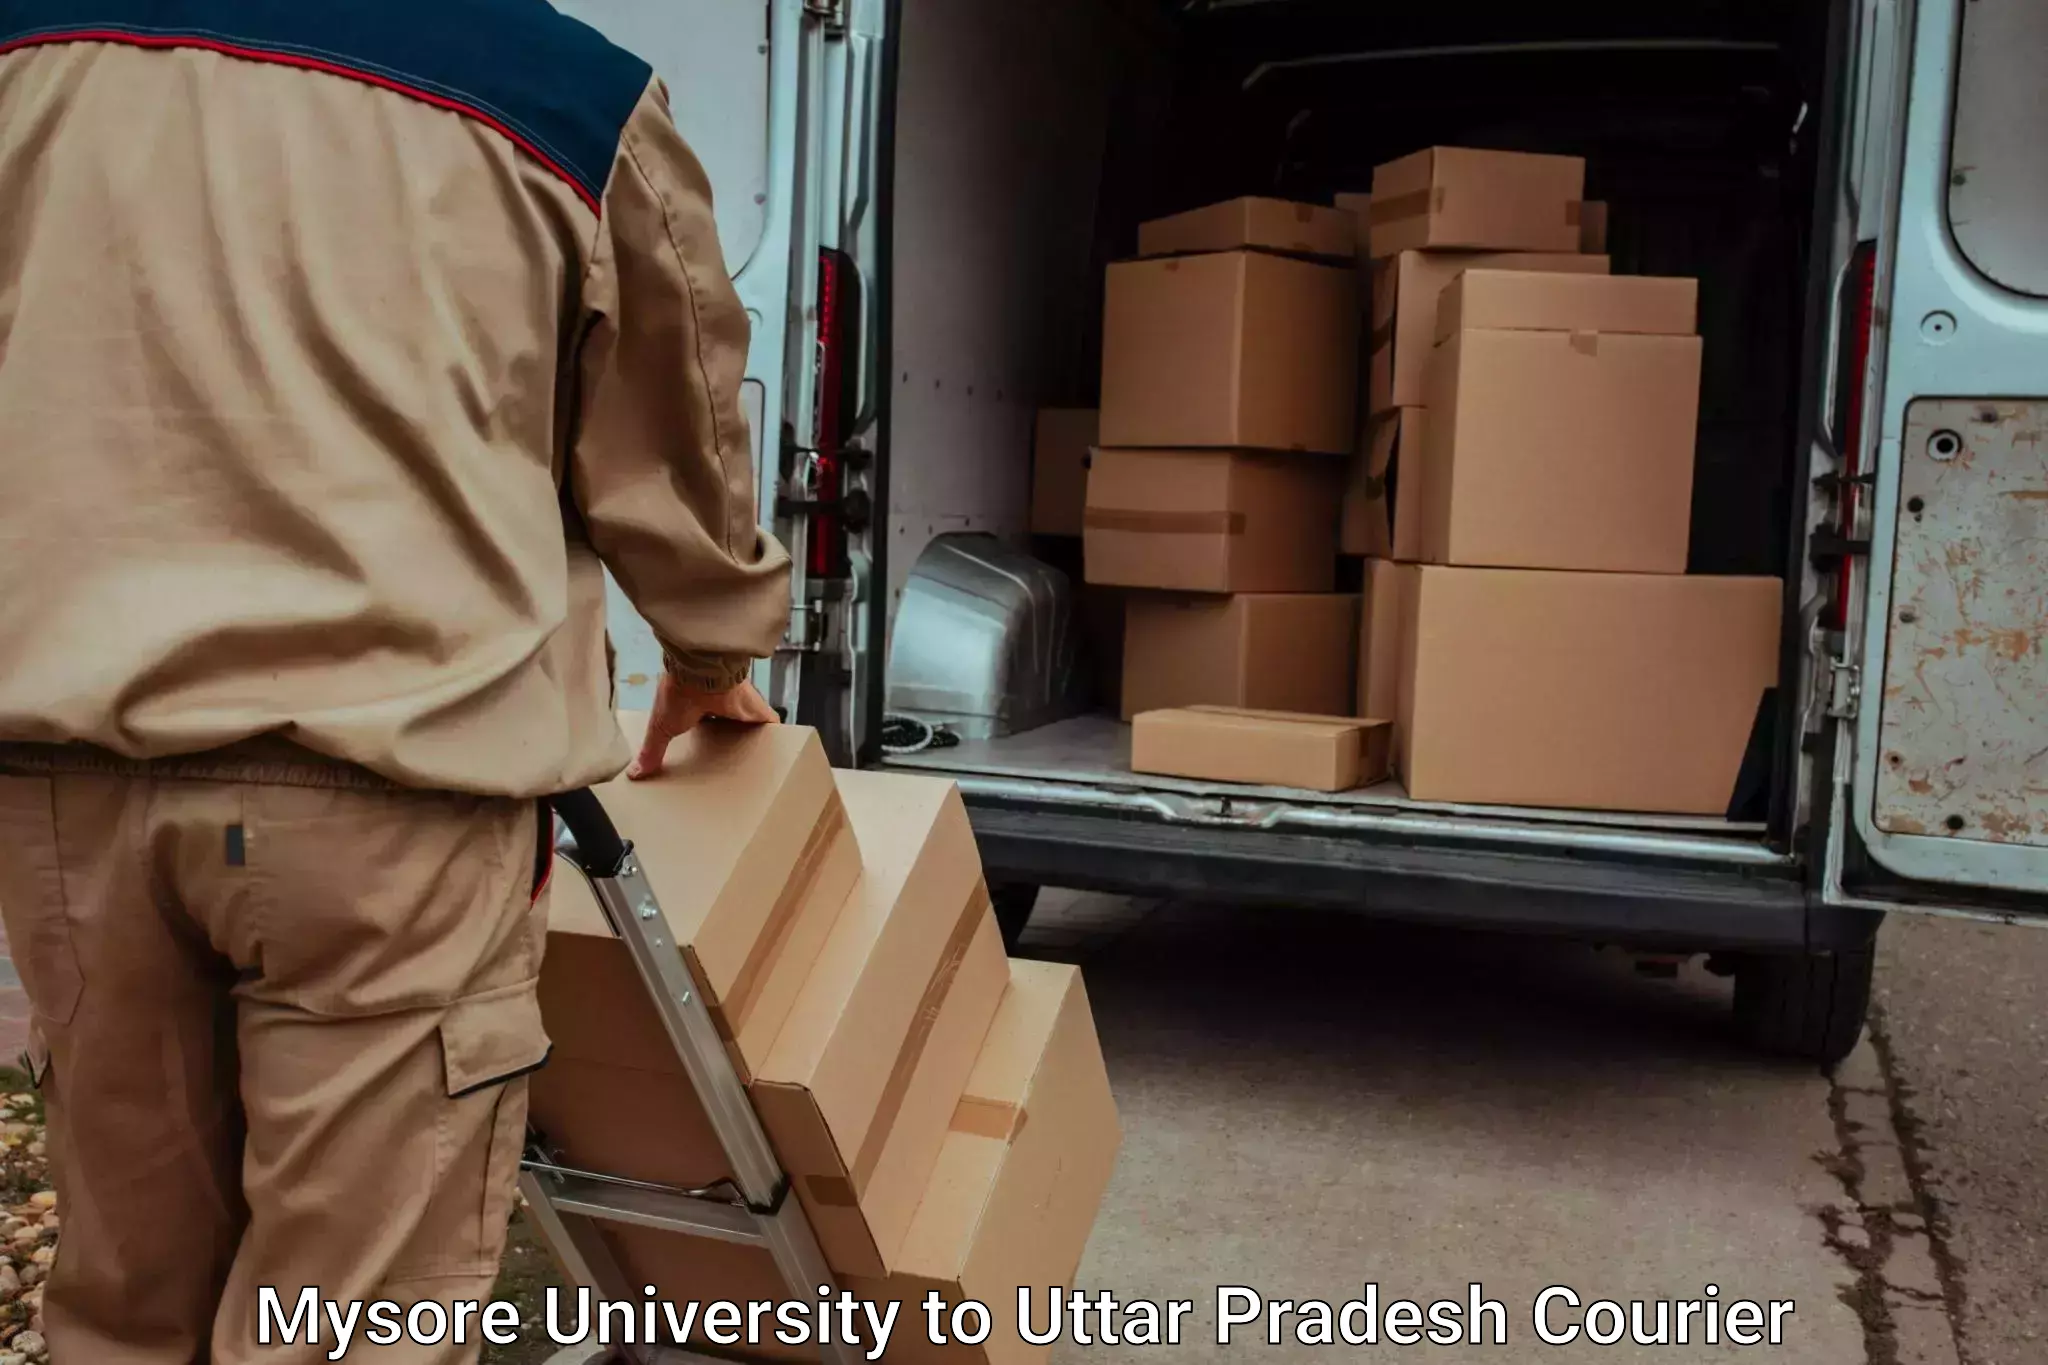 Reliable moving assistance in Mysore University to Agra